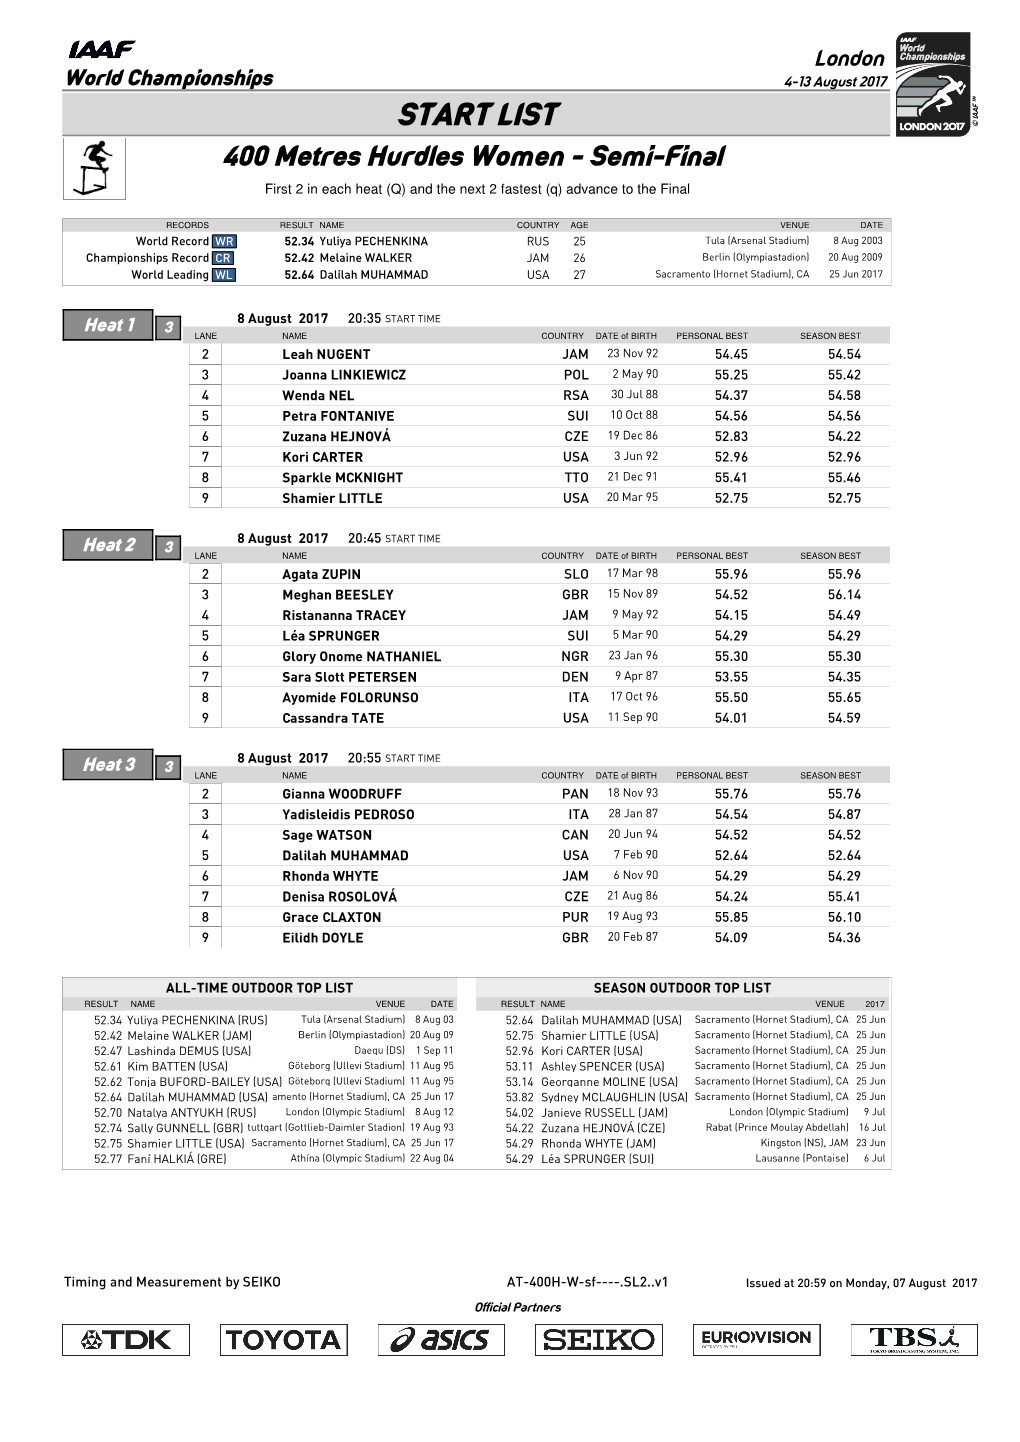 START LIST 400 Metres Hurdles Women - Semi-Final First 2 in Each Heat (Q) and the Next 2 Fastest (Q) Advance to the Final